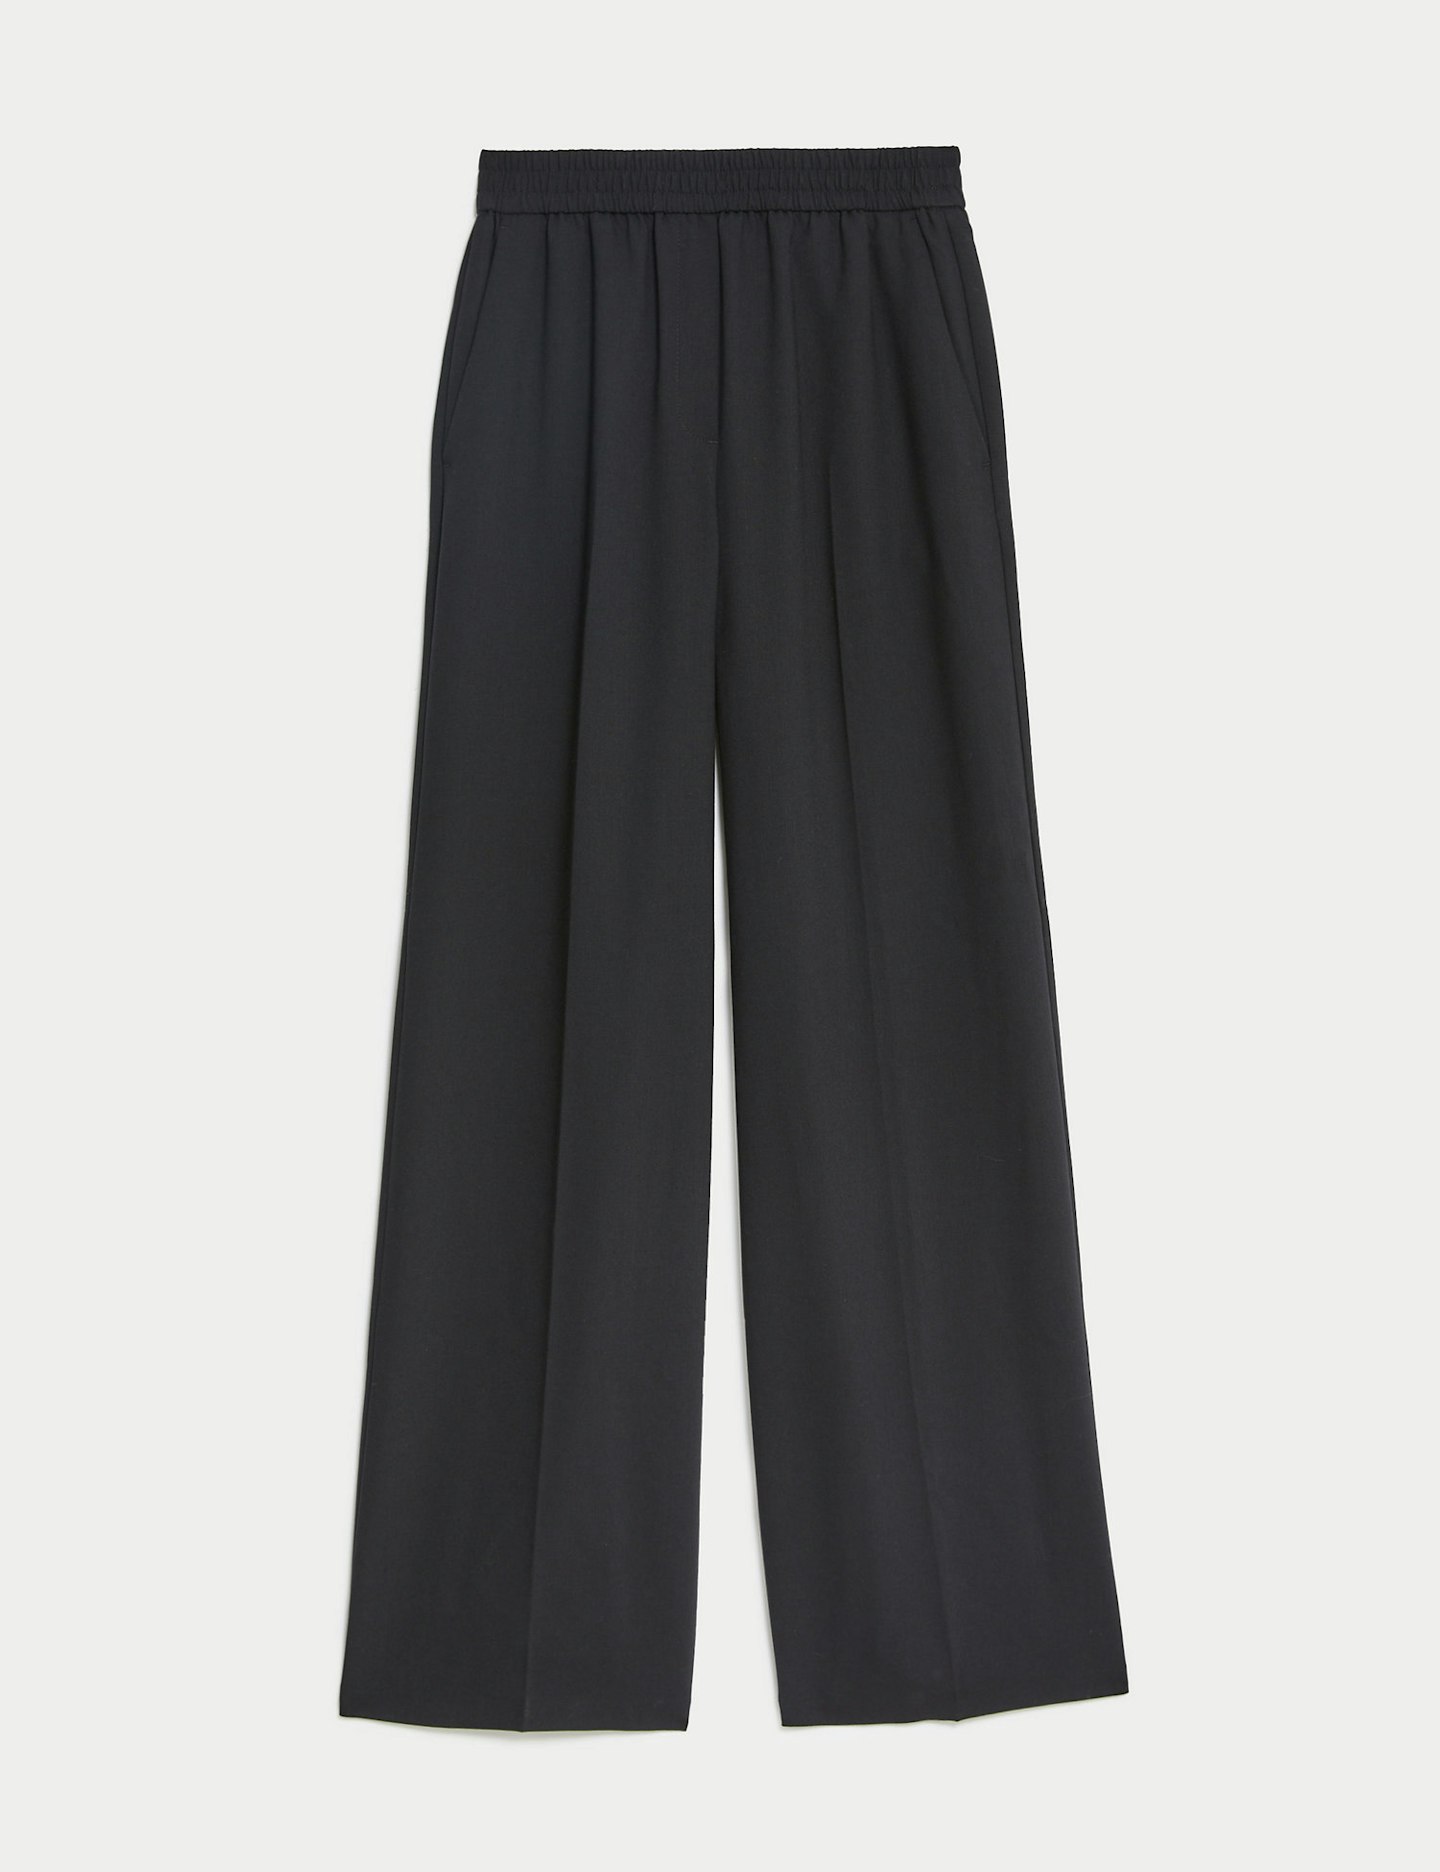 m&s trousers sienna miller 